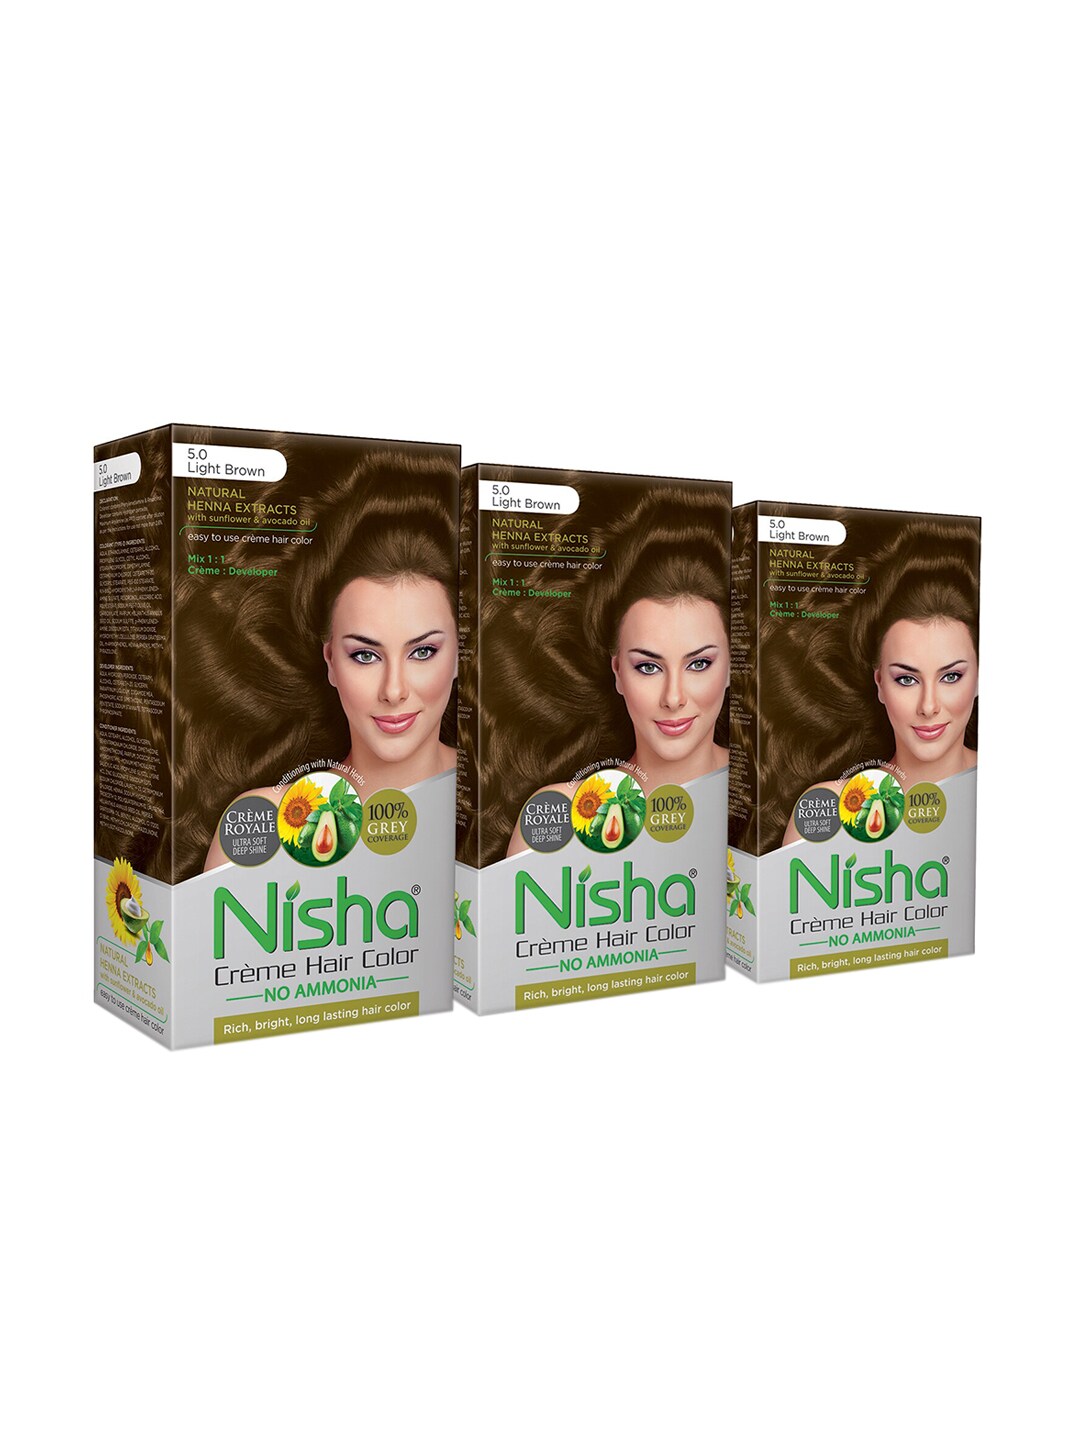 Nisha Set of 3 Creme Hair Colour 360g - Light Brown Price in India